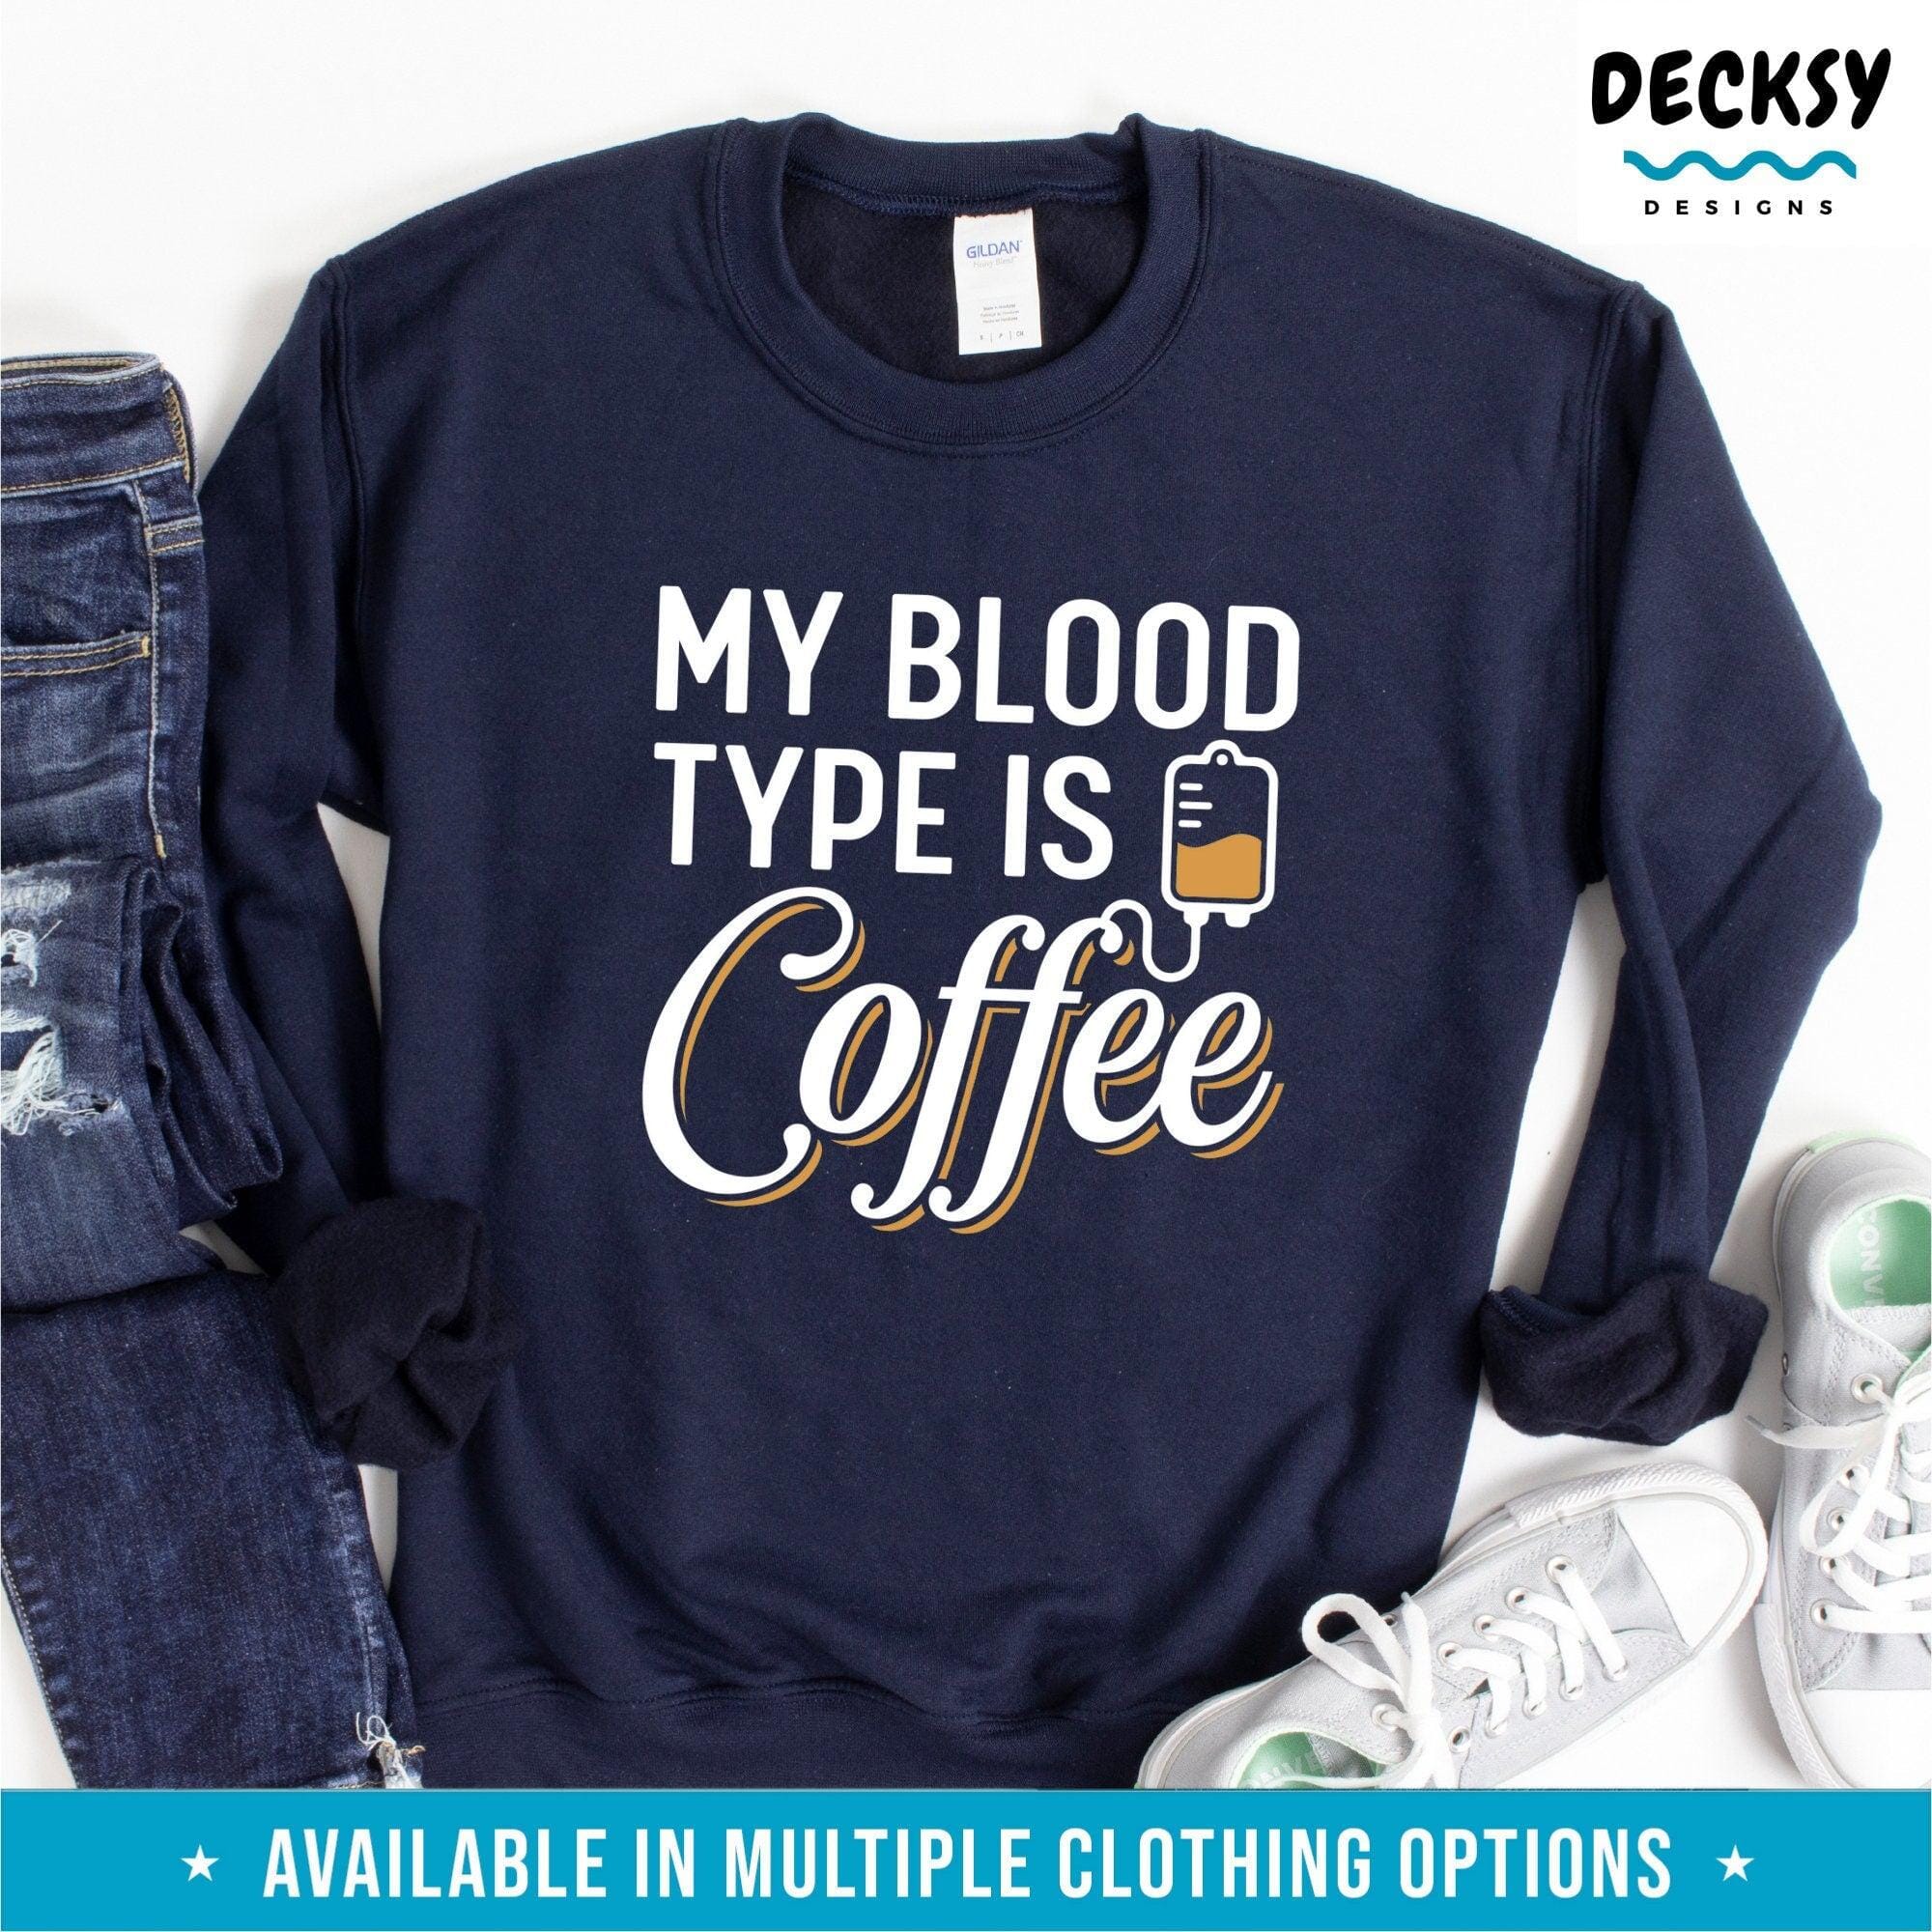 Coffee Sweatshirt, Coffee Lover Gift-Clothing:Gender-Neutral Adult Clothing:Tops & Tees:T-shirts:Graphic Tees-DecksyDesigns